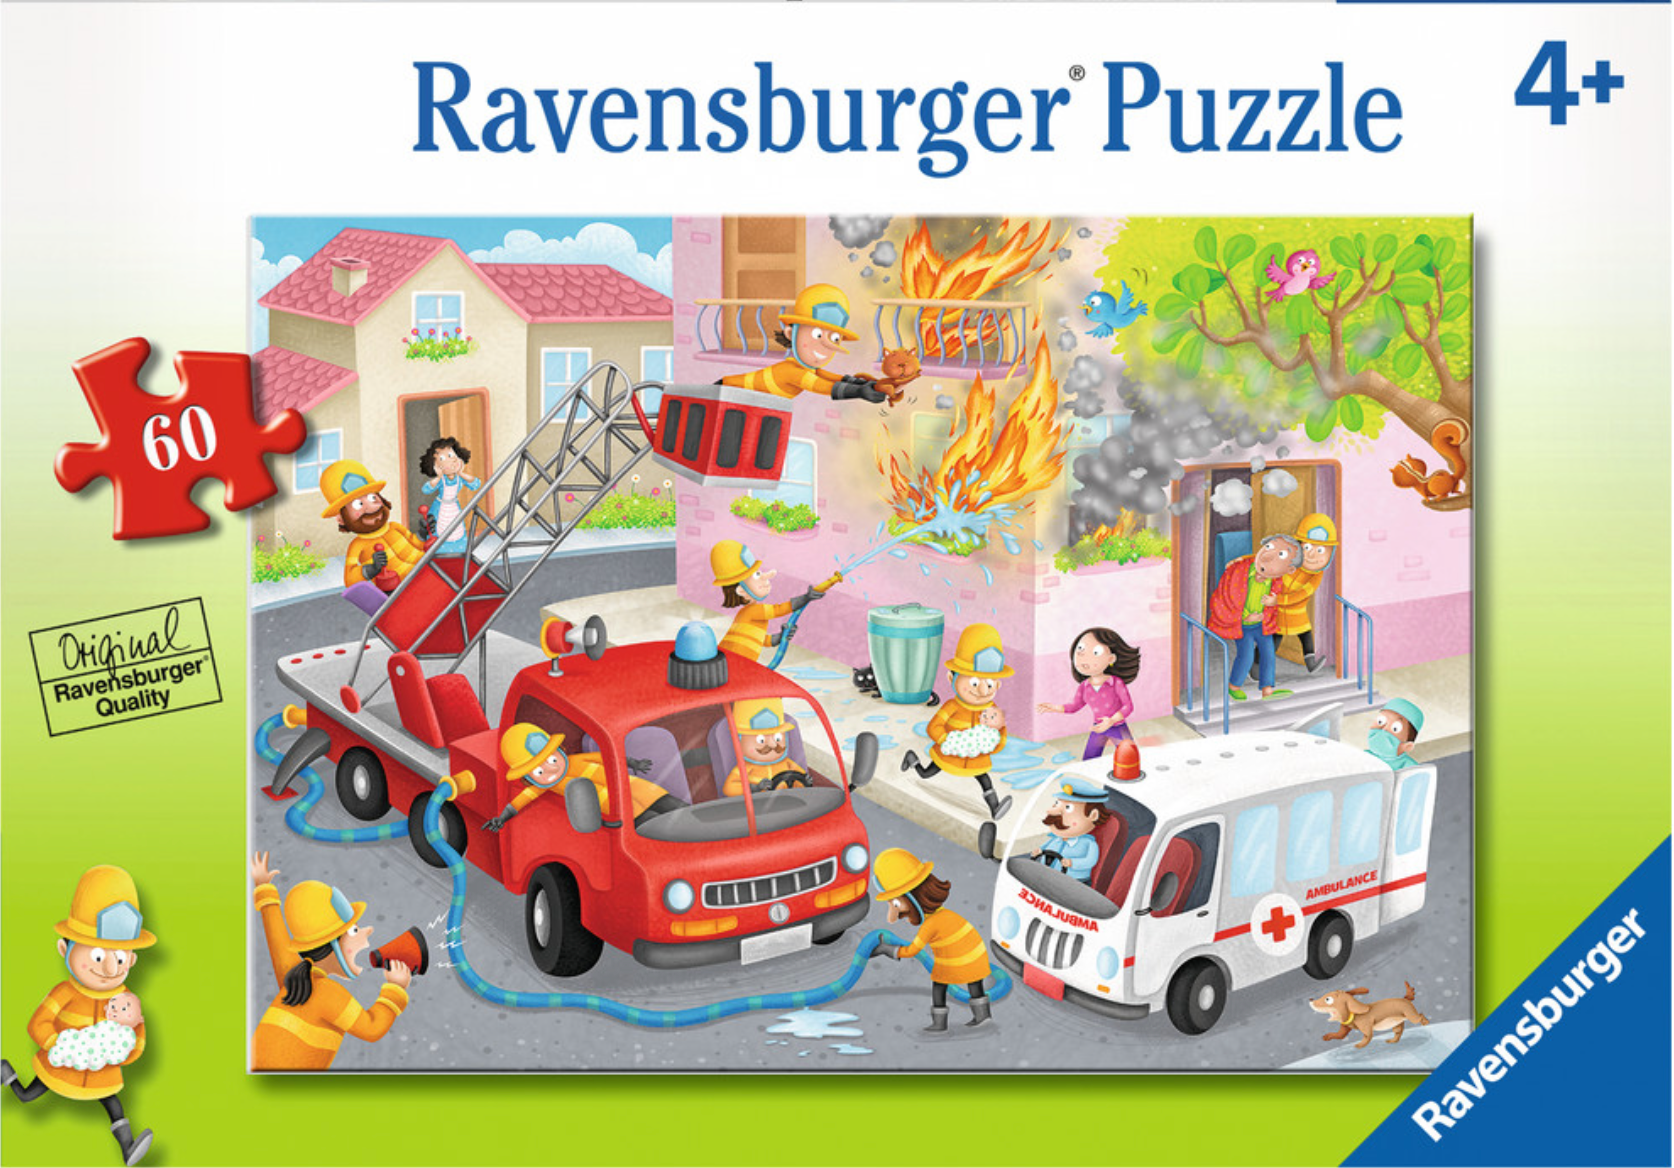 Firefighter Rescue (60 pc puzzle)